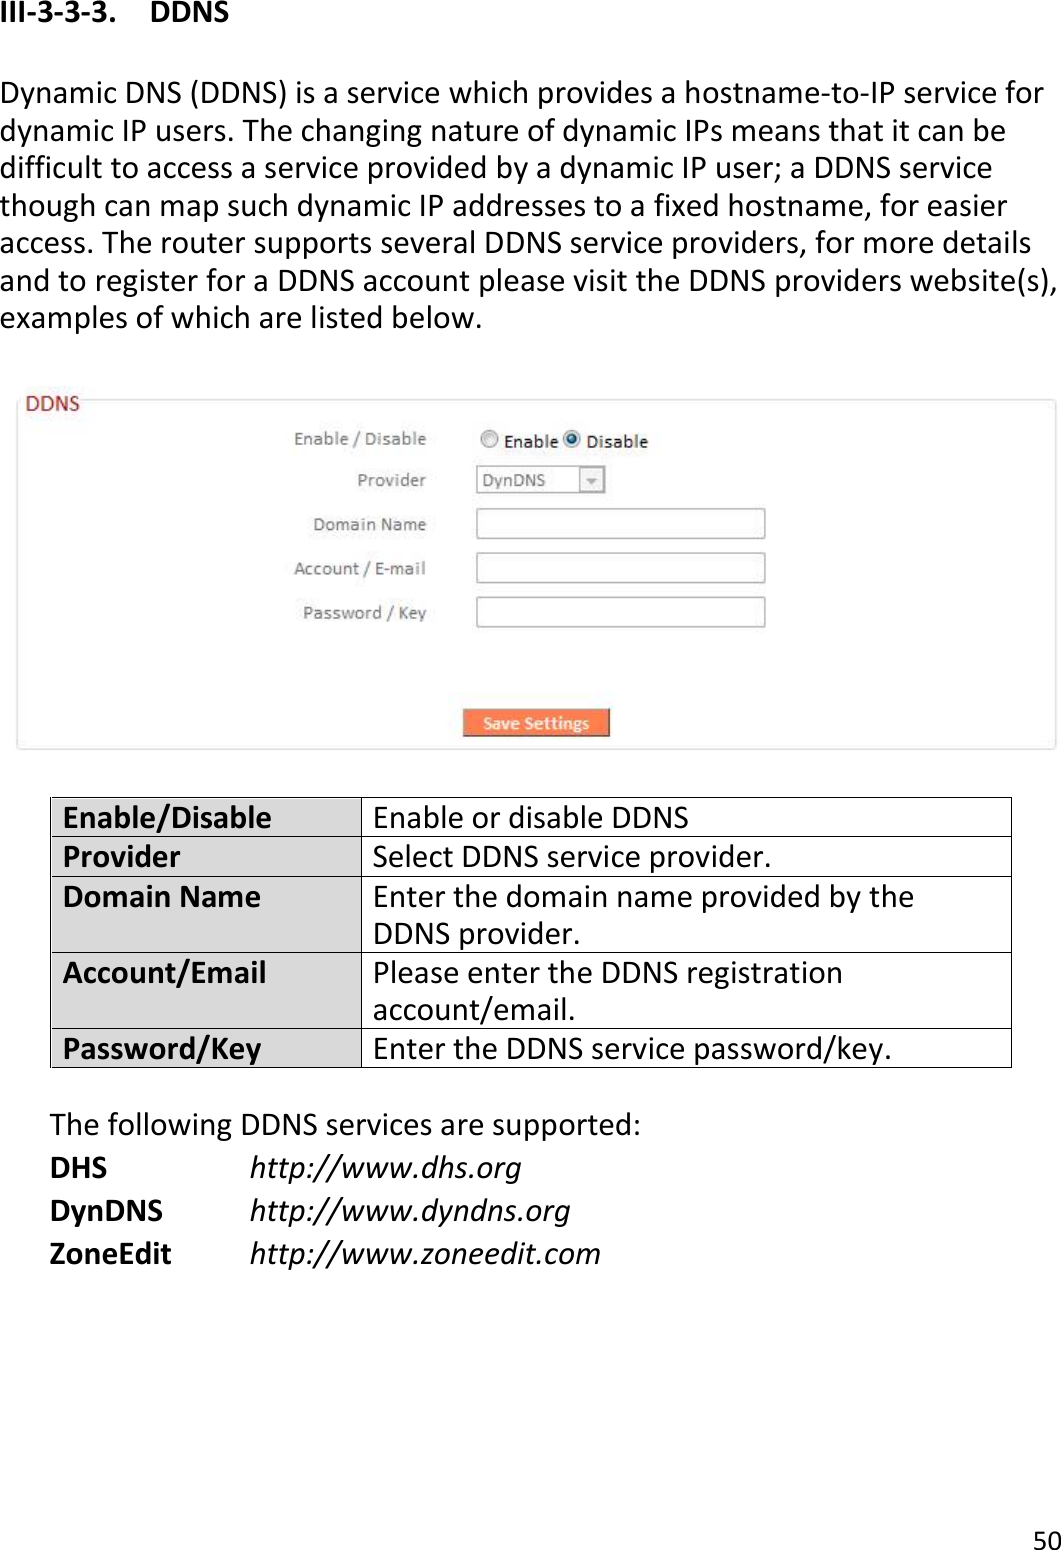 50  III-3-3-3.    DDNS  Dynamic DNS (DDNS) is a service which provides a hostname-to-IP service for dynamic IP users. The changing nature of dynamic IPs means that it can be difficult to access a service provided by a dynamic IP user; a DDNS service though can map such dynamic IP addresses to a fixed hostname, for easier access. The router supports several DDNS service providers, for more details and to register for a DDNS account please visit the DDNS providers website(s), examples of which are listed below.    Enable/Disable Enable or disable DDNS Provider Select DDNS service provider. Domain Name Enter the domain name provided by the DDNS provider. Account/Email Please enter the DDNS registration account/email. Password/Key Enter the DDNS service password/key.  The following DDNS services are supported: DHS        http://www.dhs.org DynDNS      http://www.dyndns.org ZoneEdit     http://www.zoneedit.com      